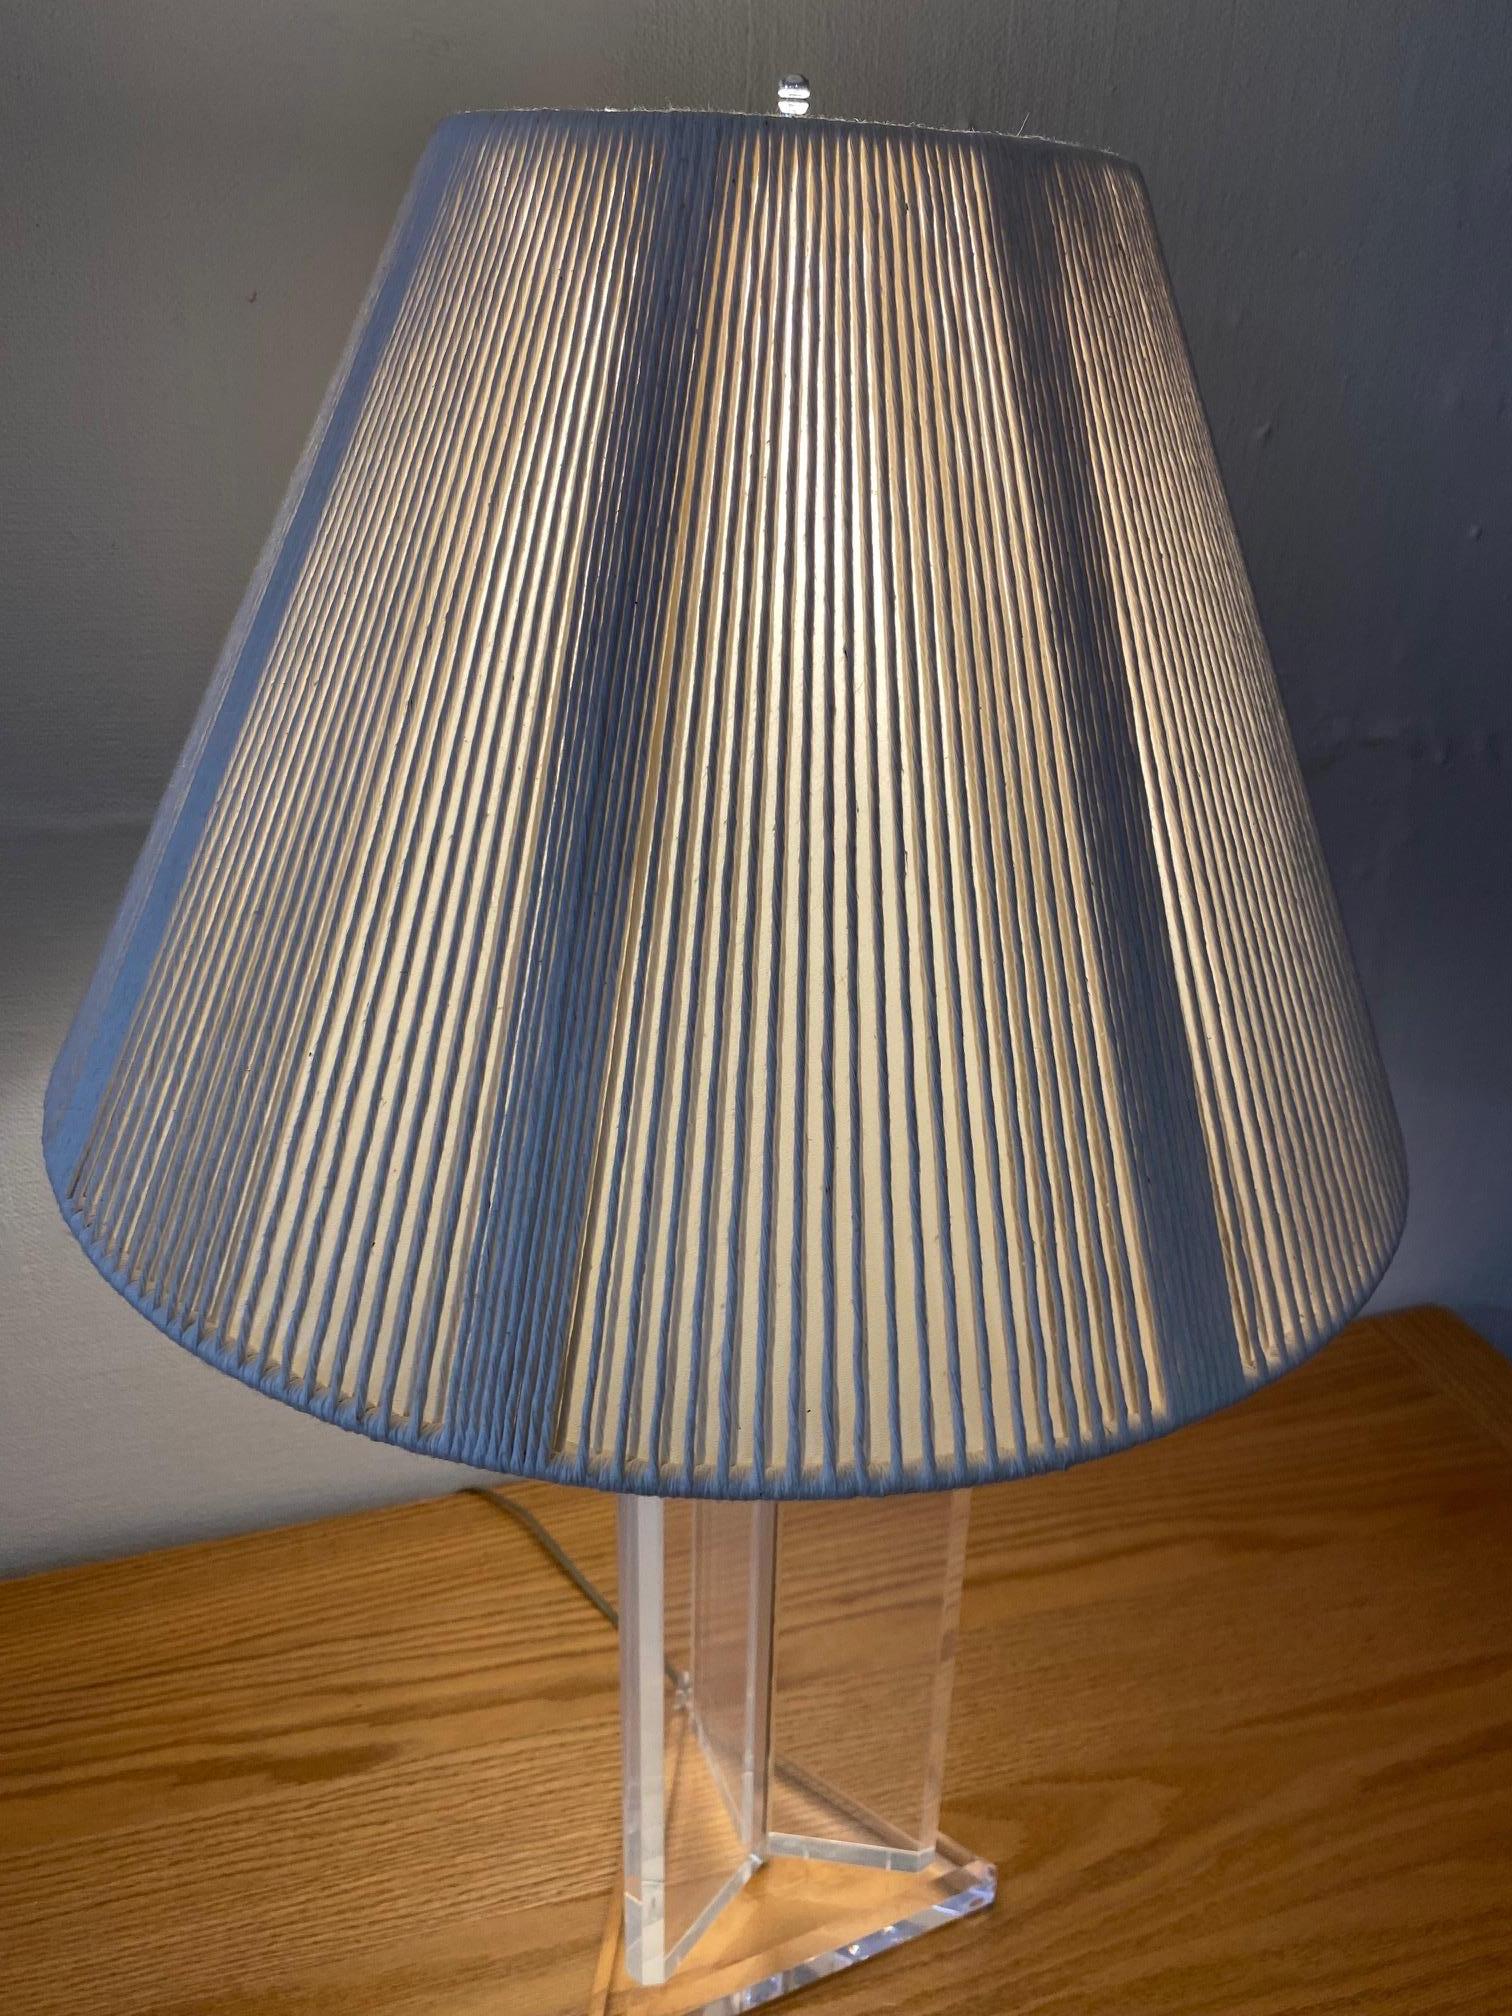 Vintage Lucite Lamp with Original String Shade In Good Condition For Sale In Hopewell, NJ